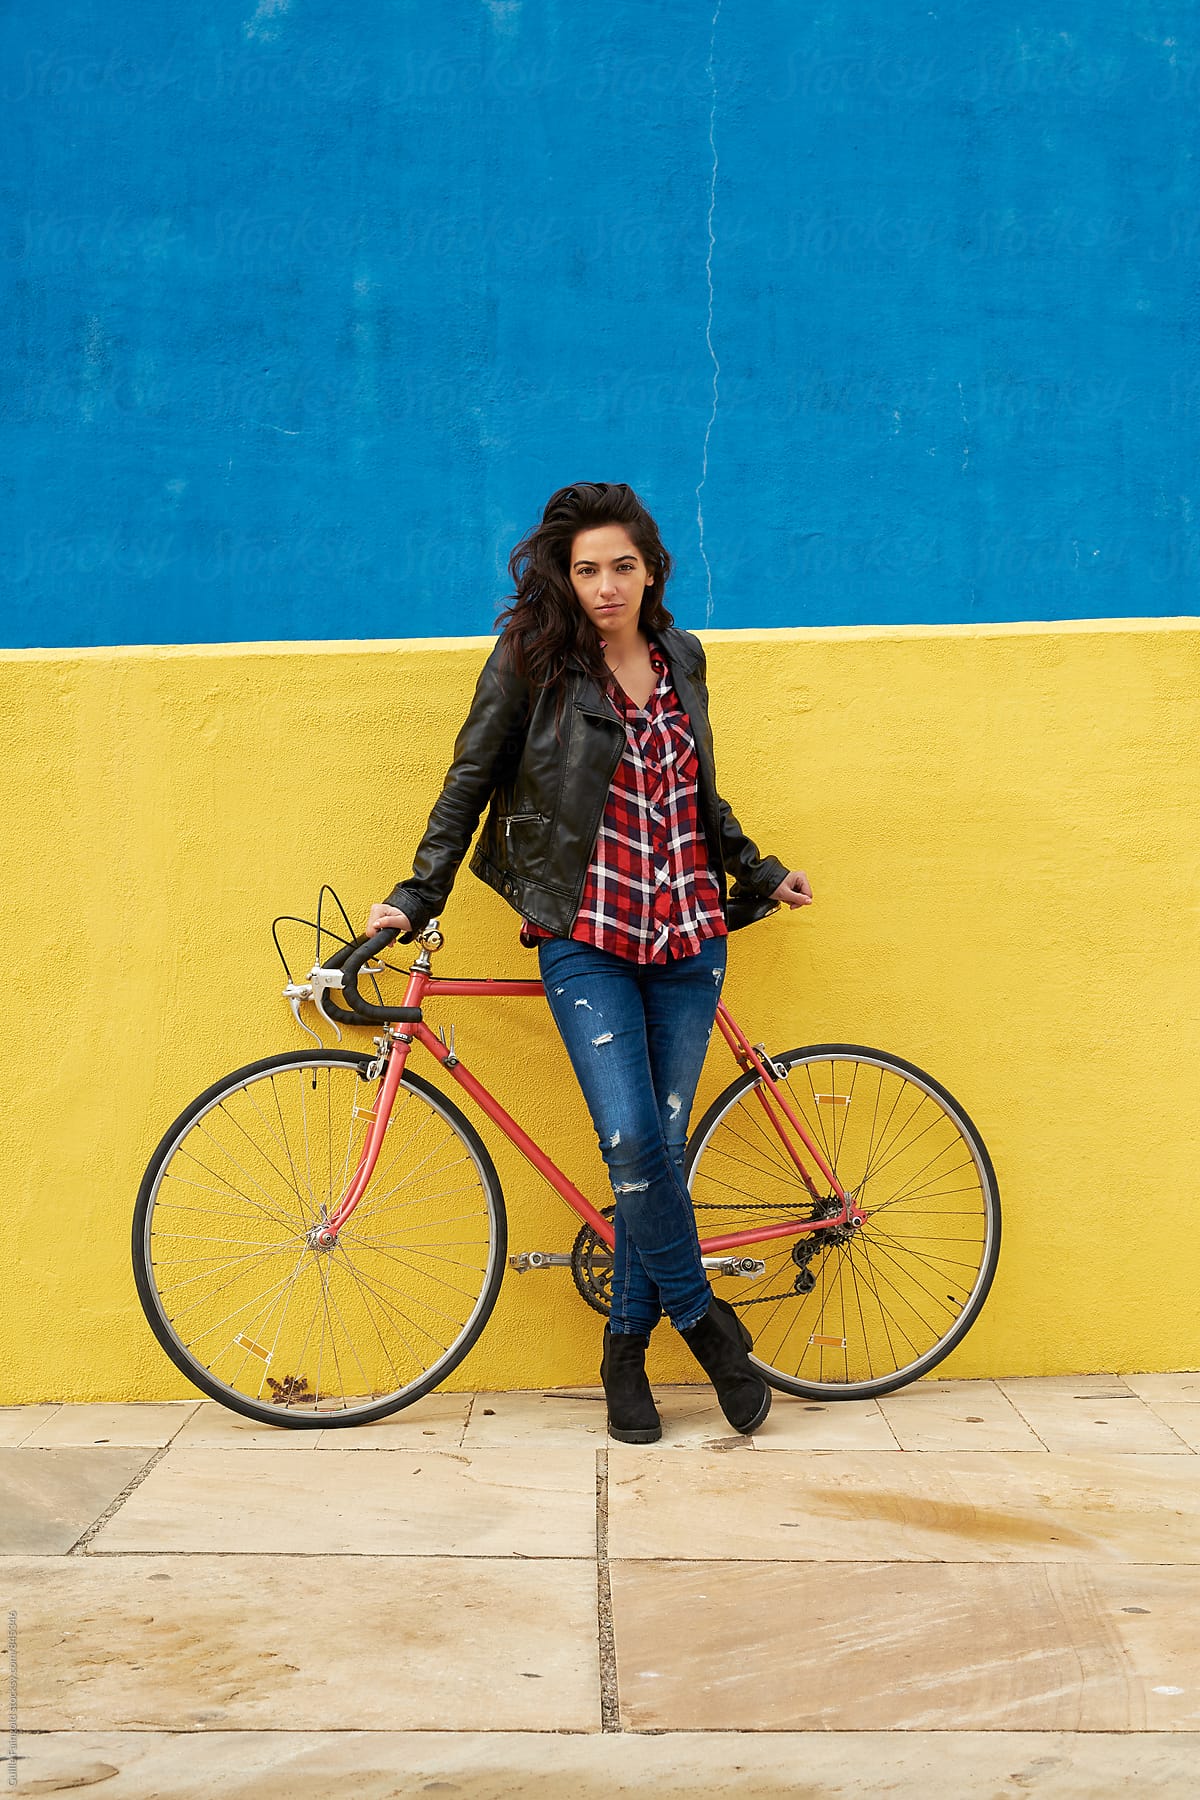 Female with bike resting near colorful wall